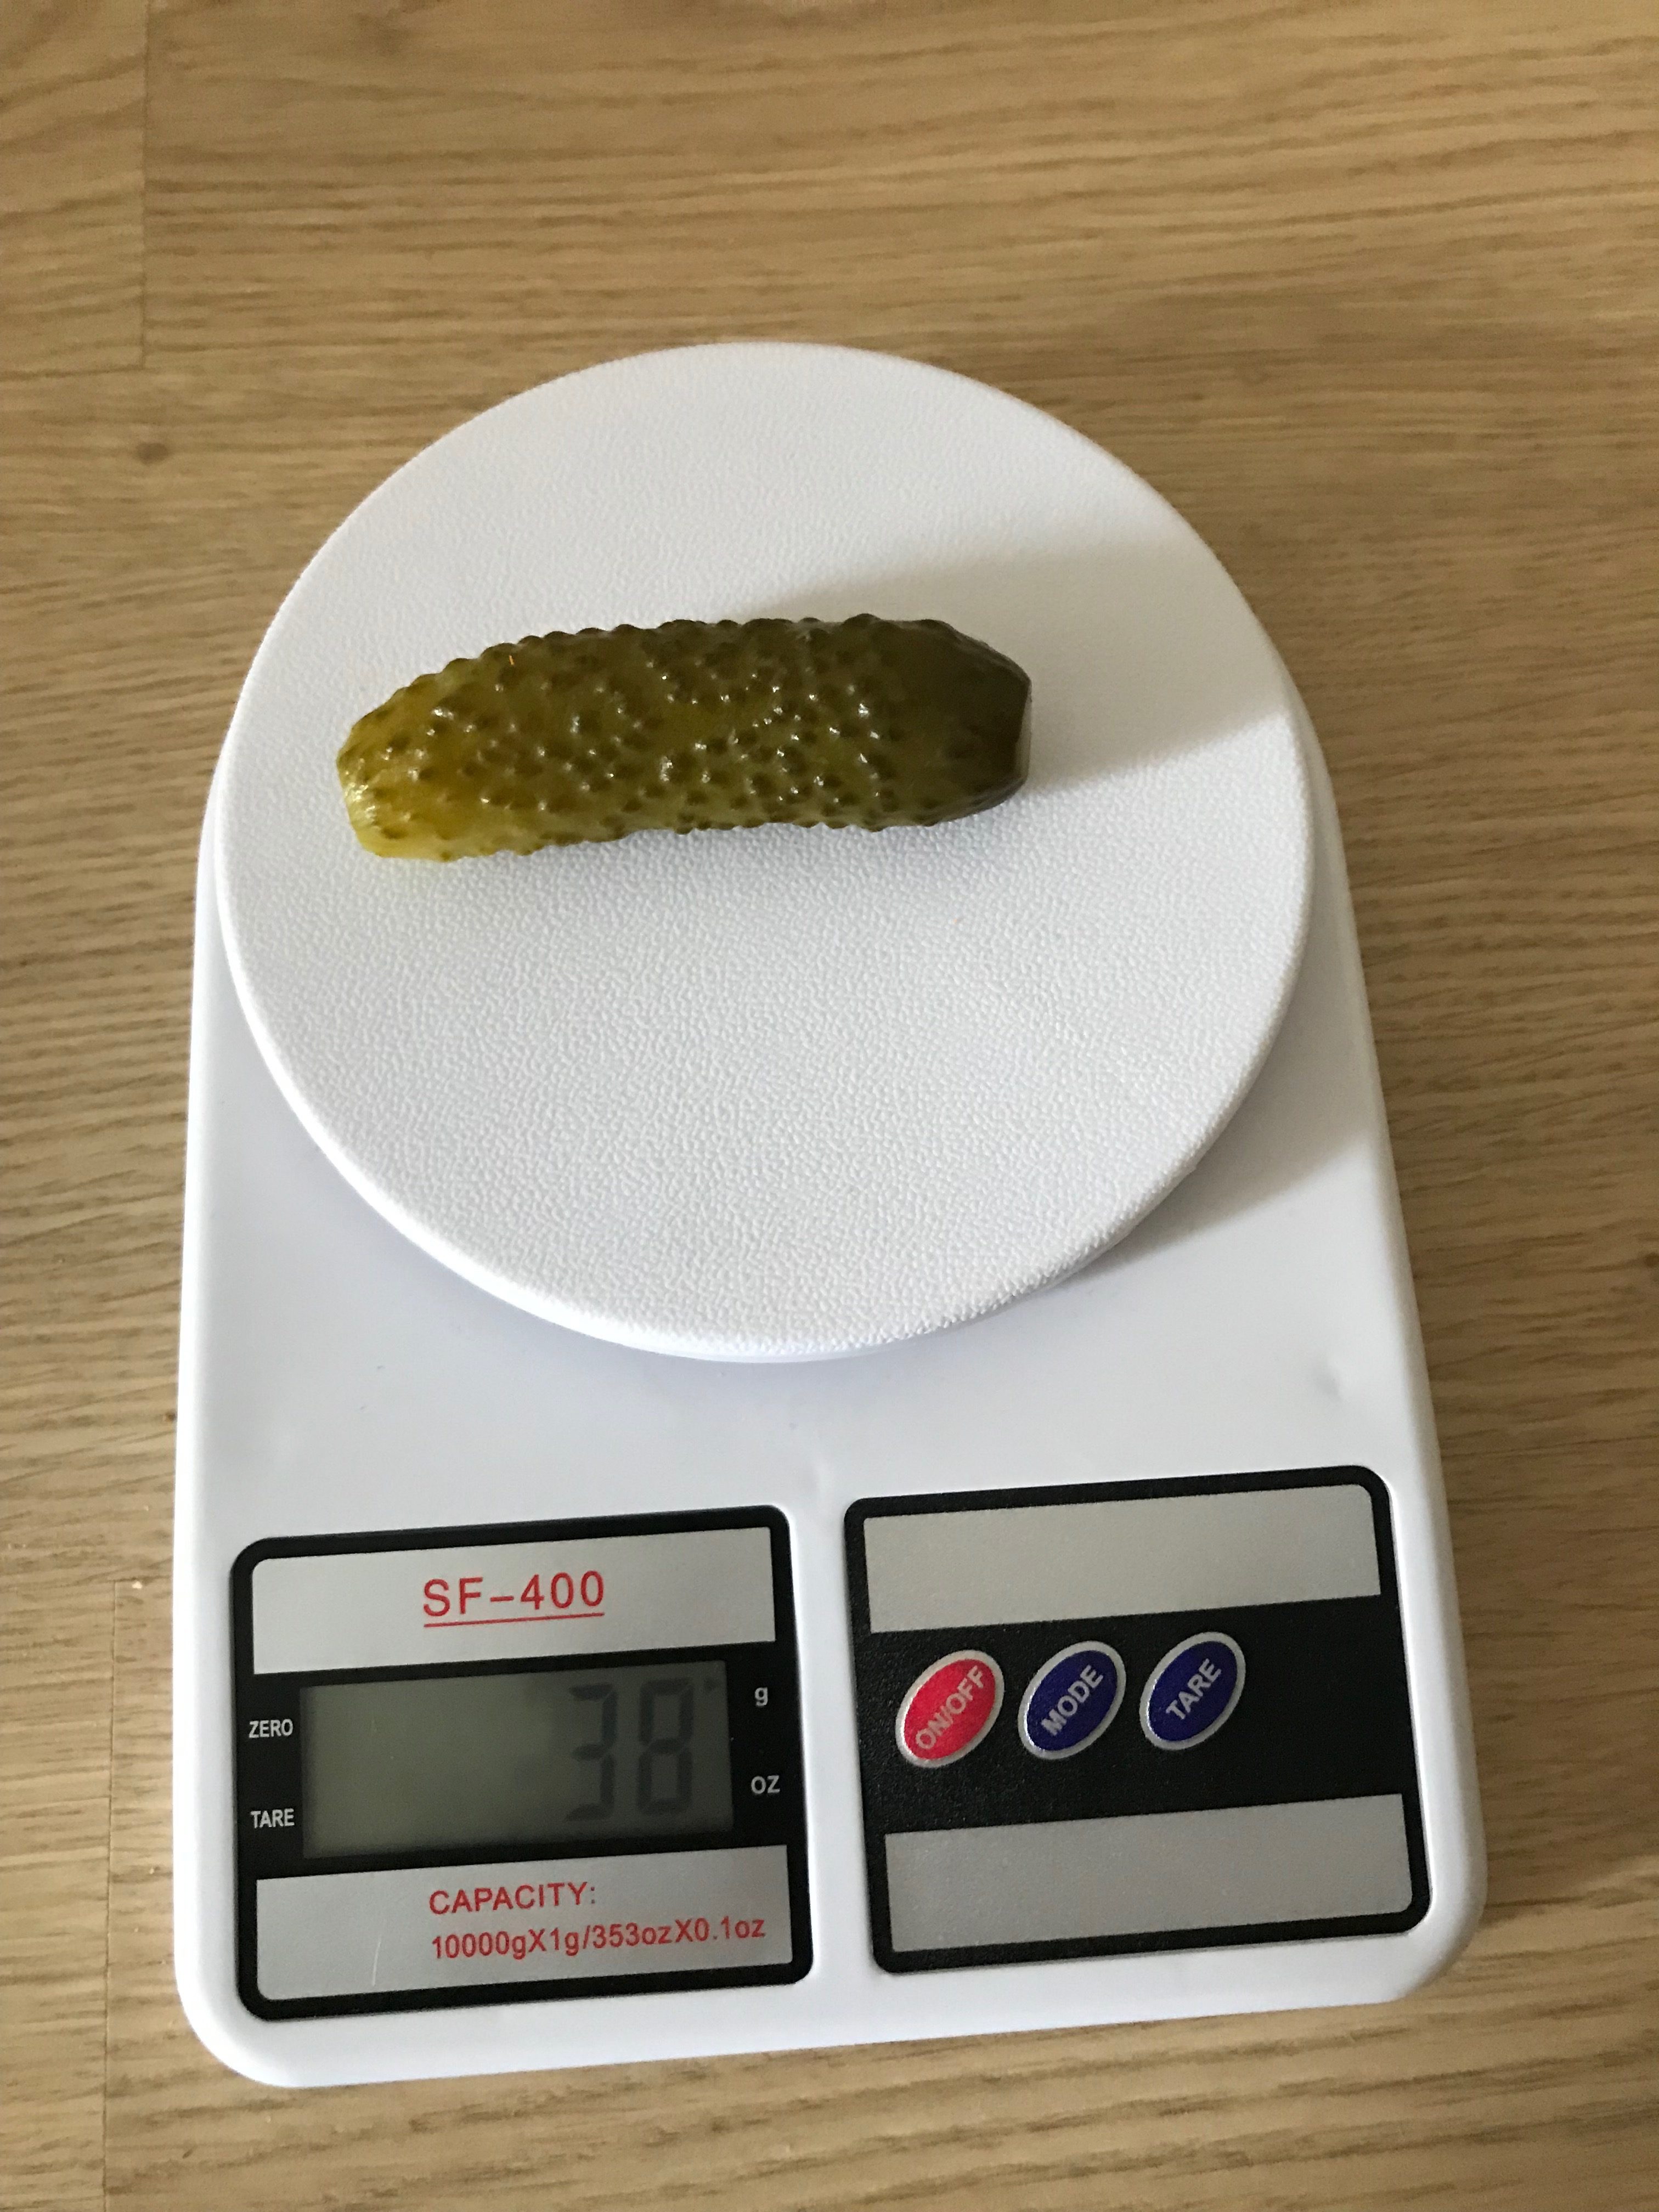 How much does a pickled cucumber weigh?